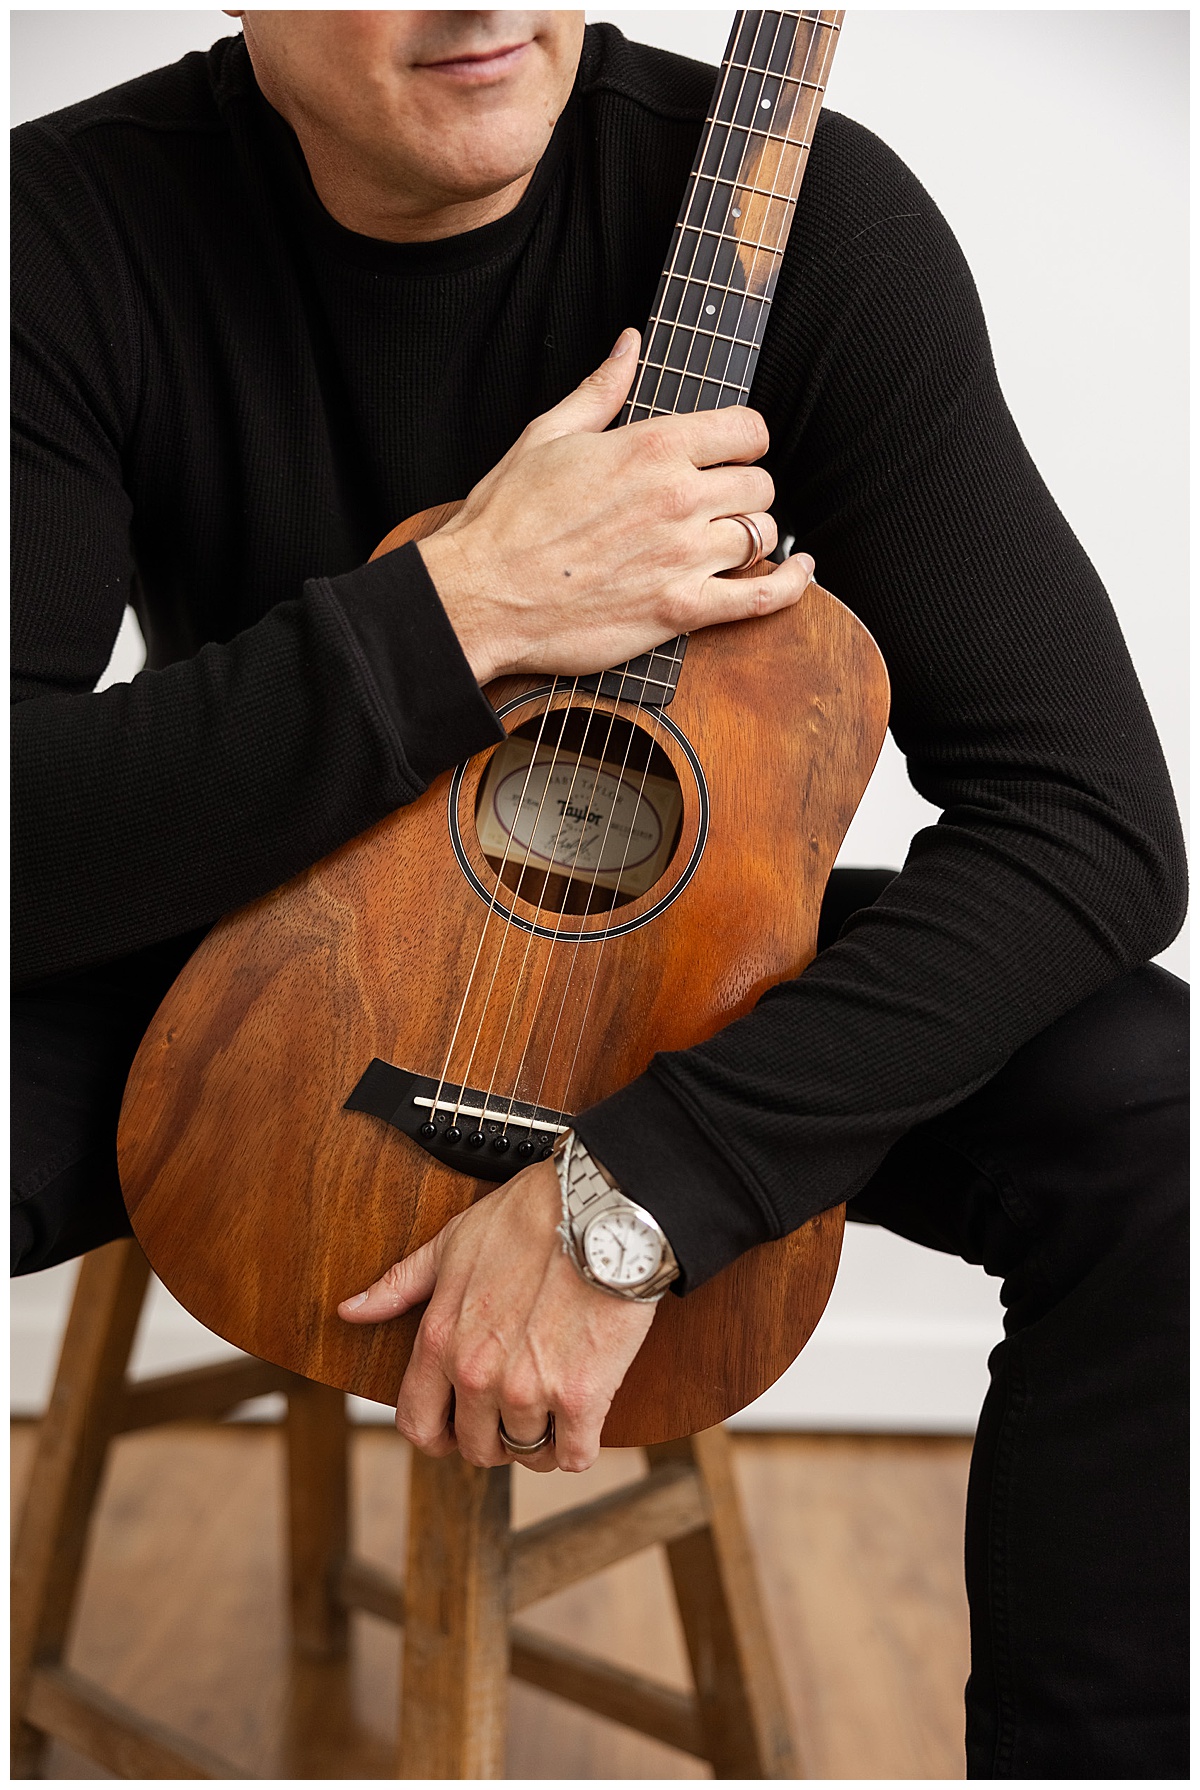 Adult grabs guitar while sitting on a chair as an example of Men’s Brand Photoshoot Ideas